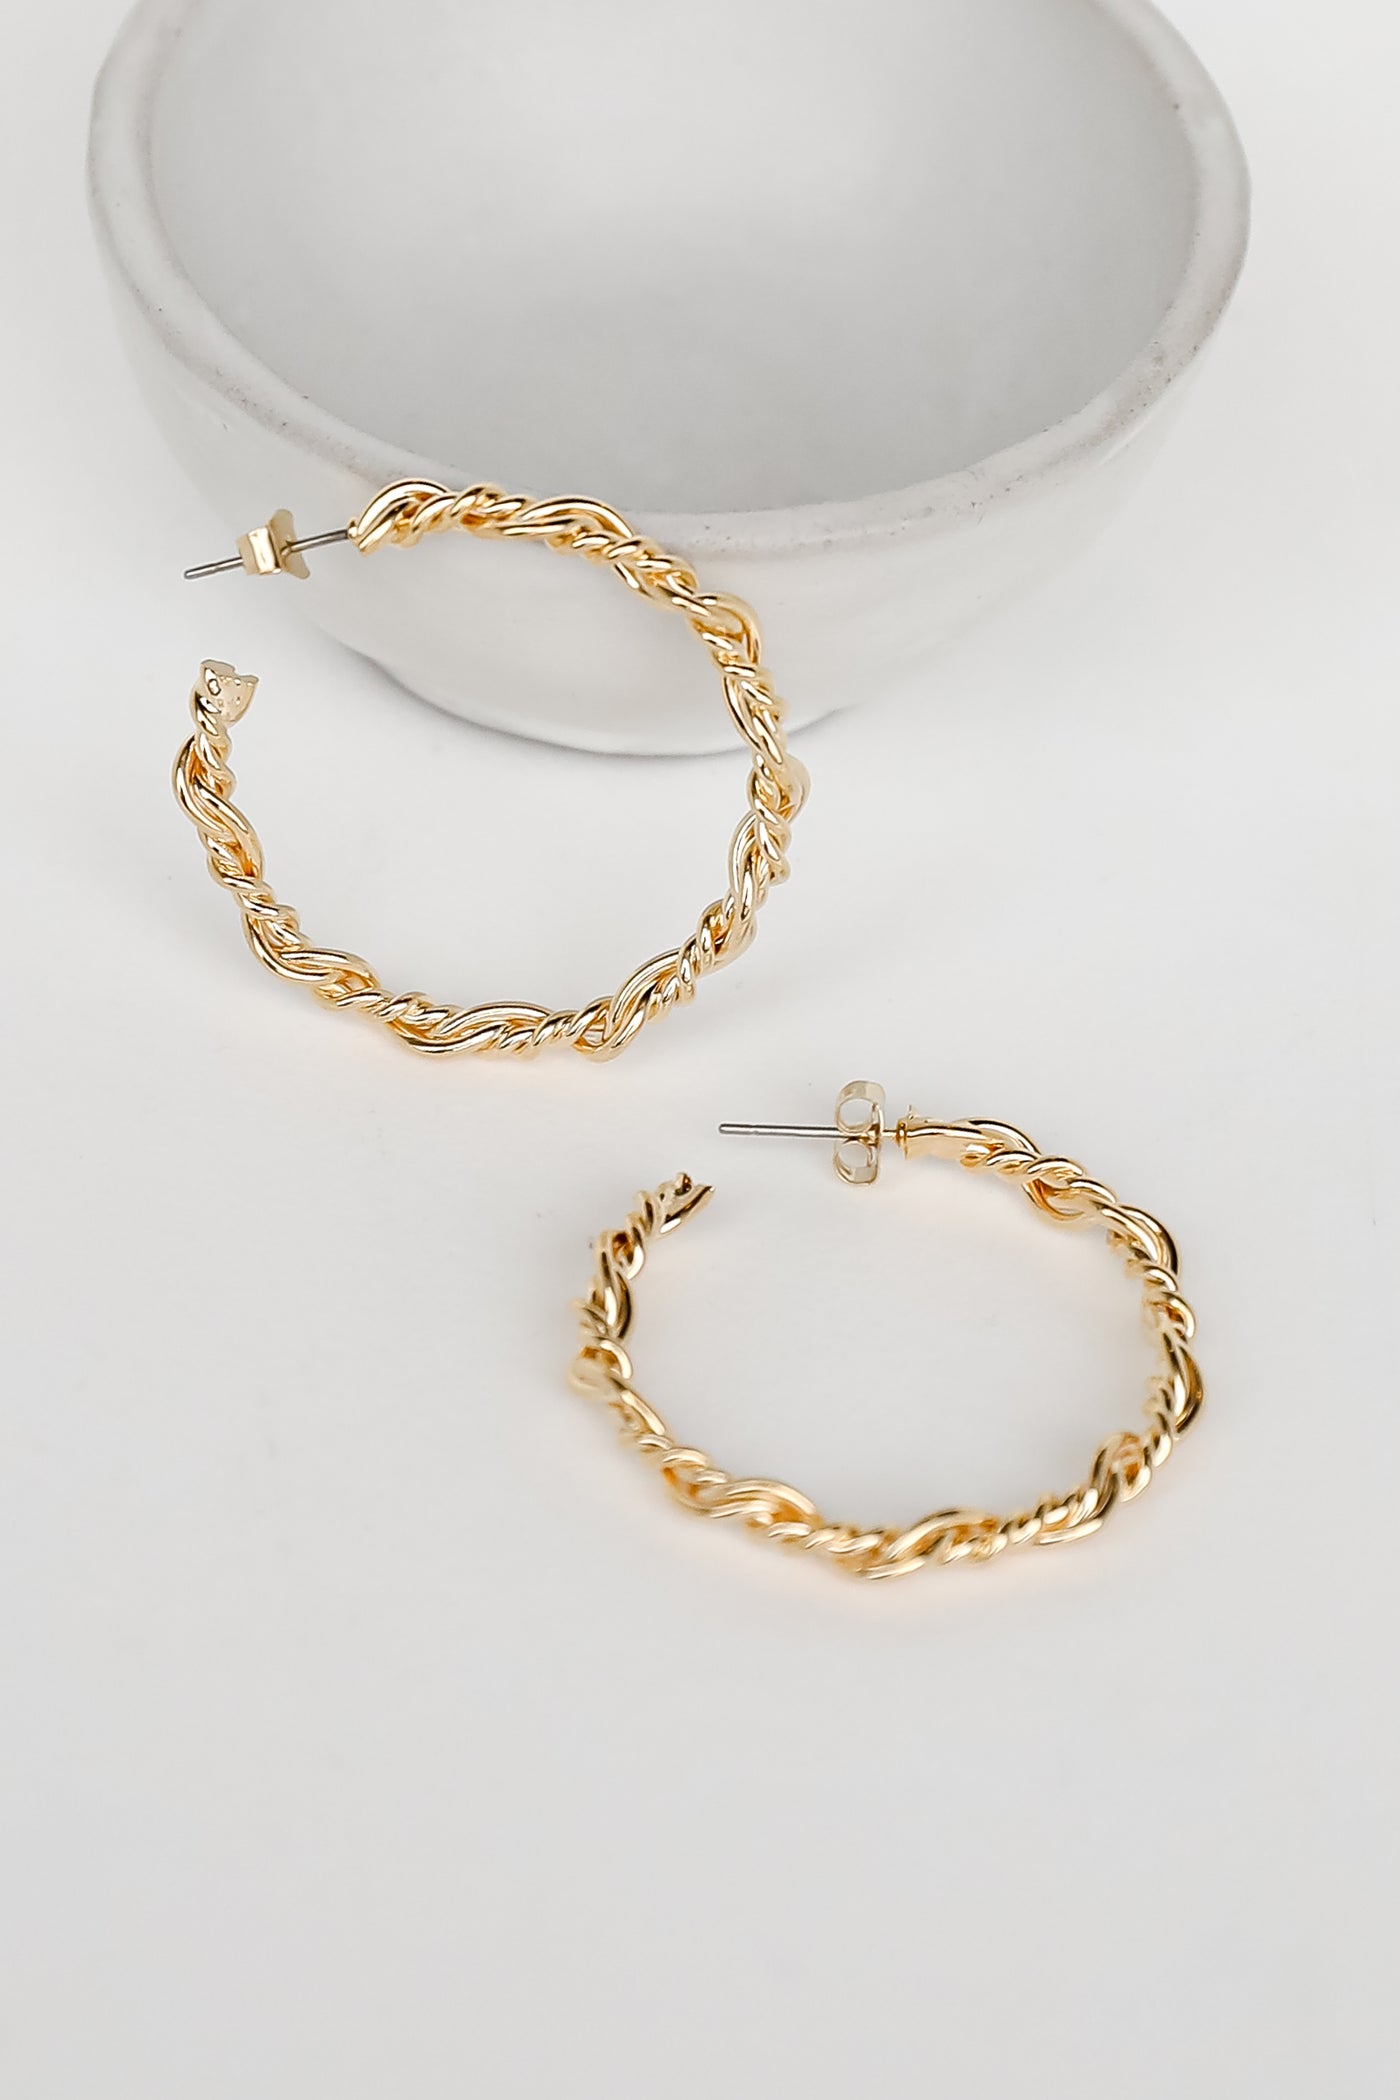 Gold Twisted Hoop Earrings close up